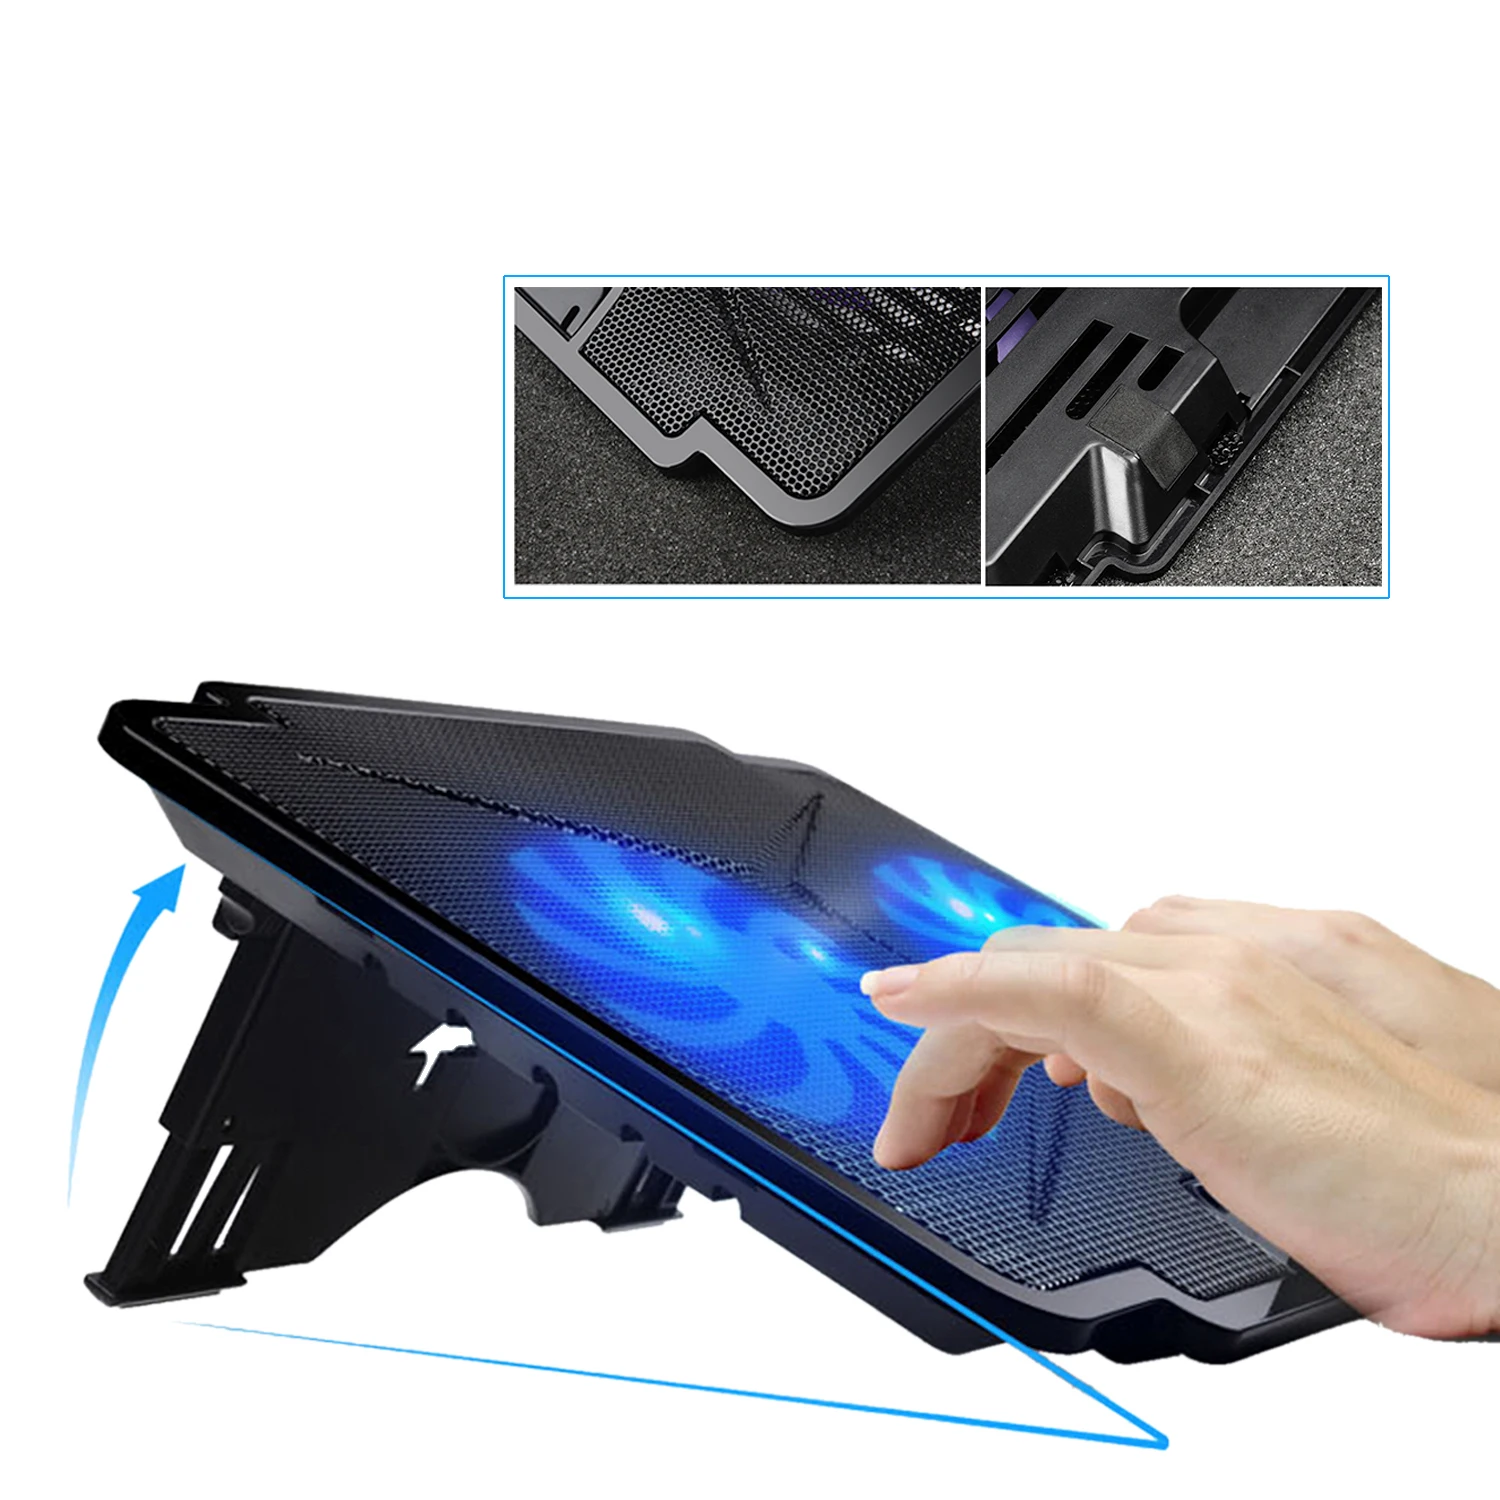 
Ultra Slim Portable 10-15.6 Laptop Cooler Cooling Pads 2 Quiet Big Fans with USB ports 